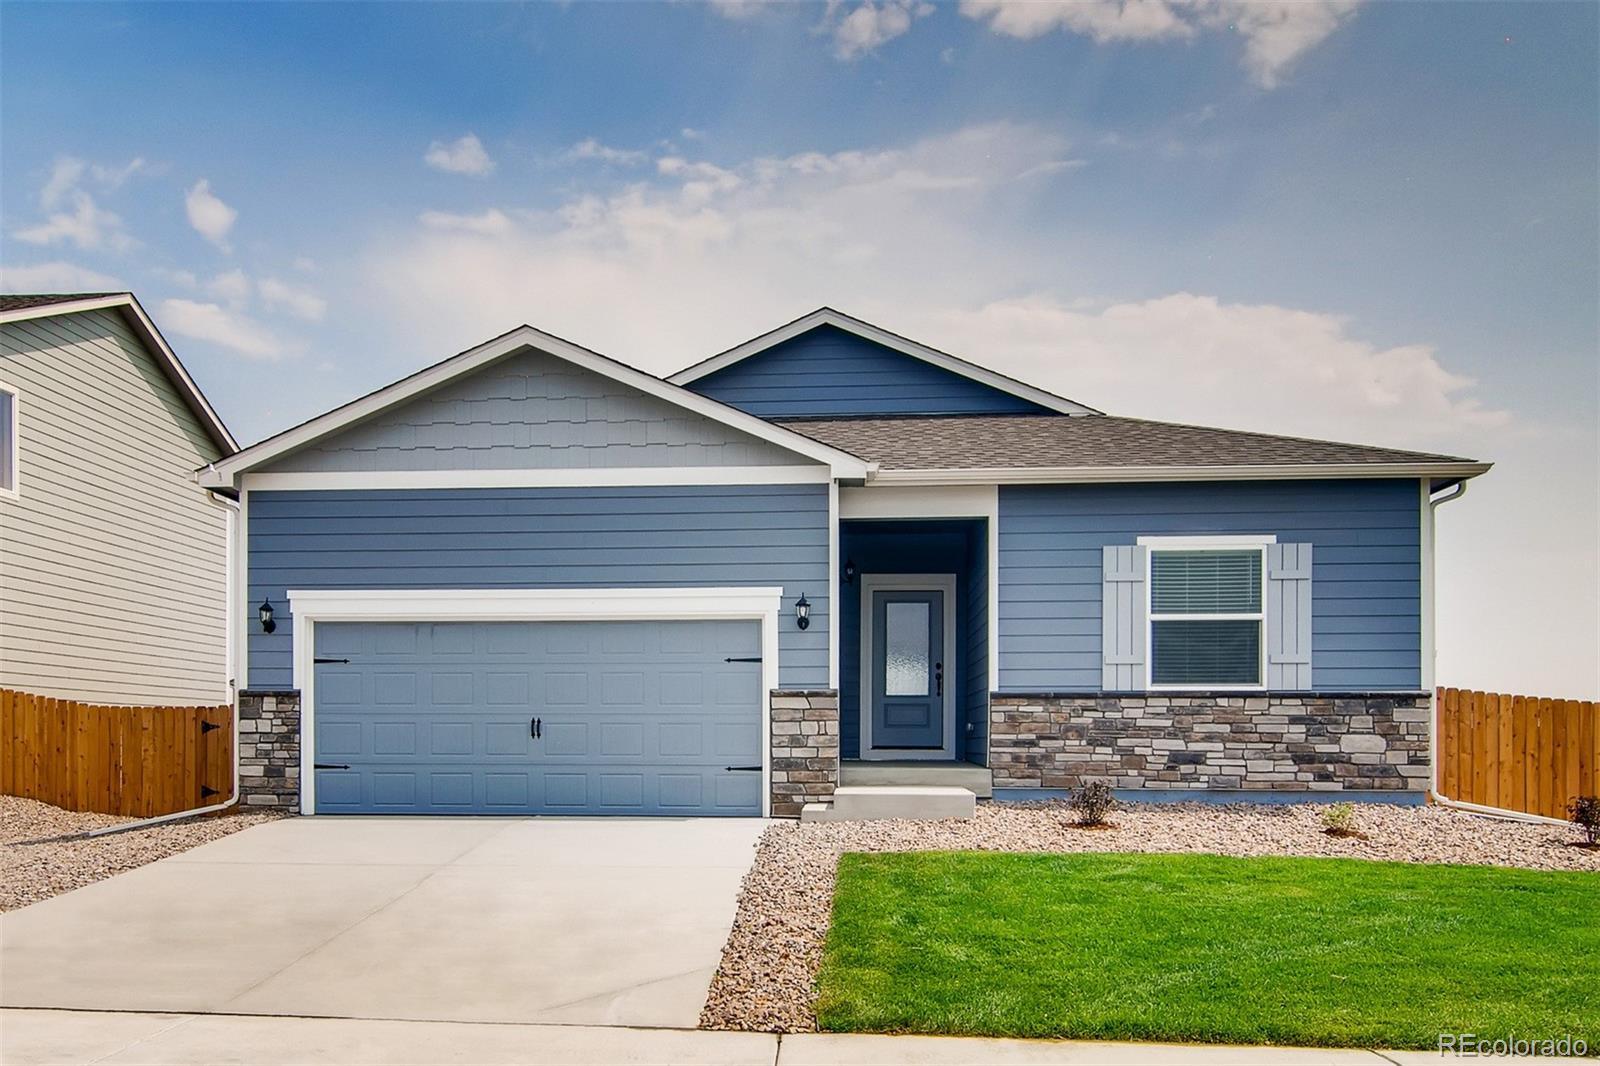 17890 East 95th Place, Commerce City, CO 80022 - MLS#: 3685762